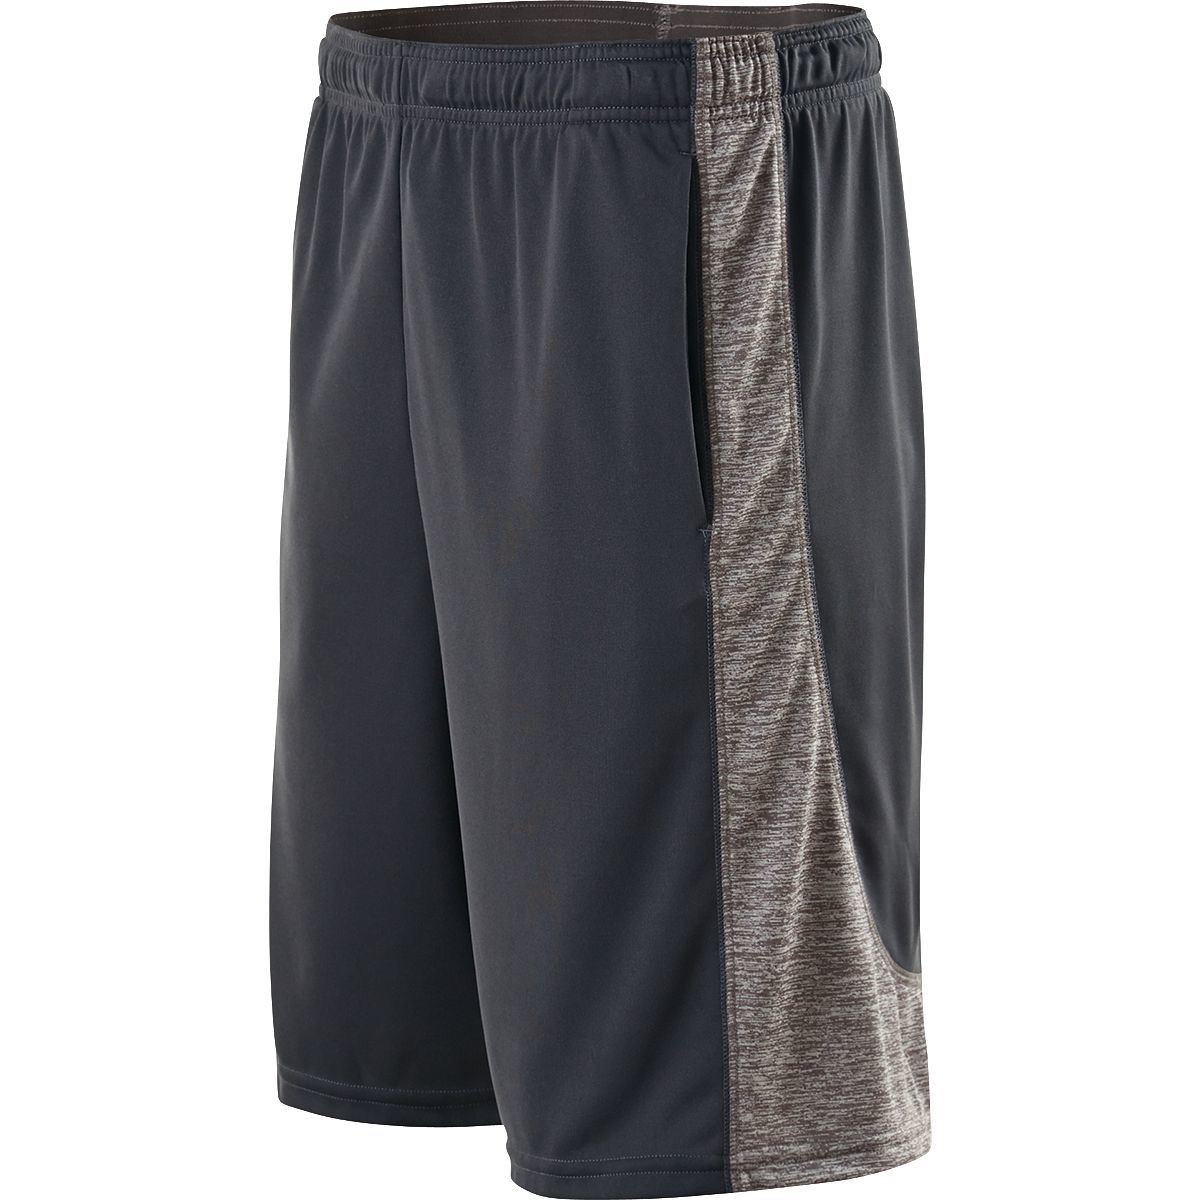 Holloway Electron Shorts in Carbon/Graphite Heather  -Part of the Adult, Adult-Shorts, Holloway product lines at KanaleyCreations.com